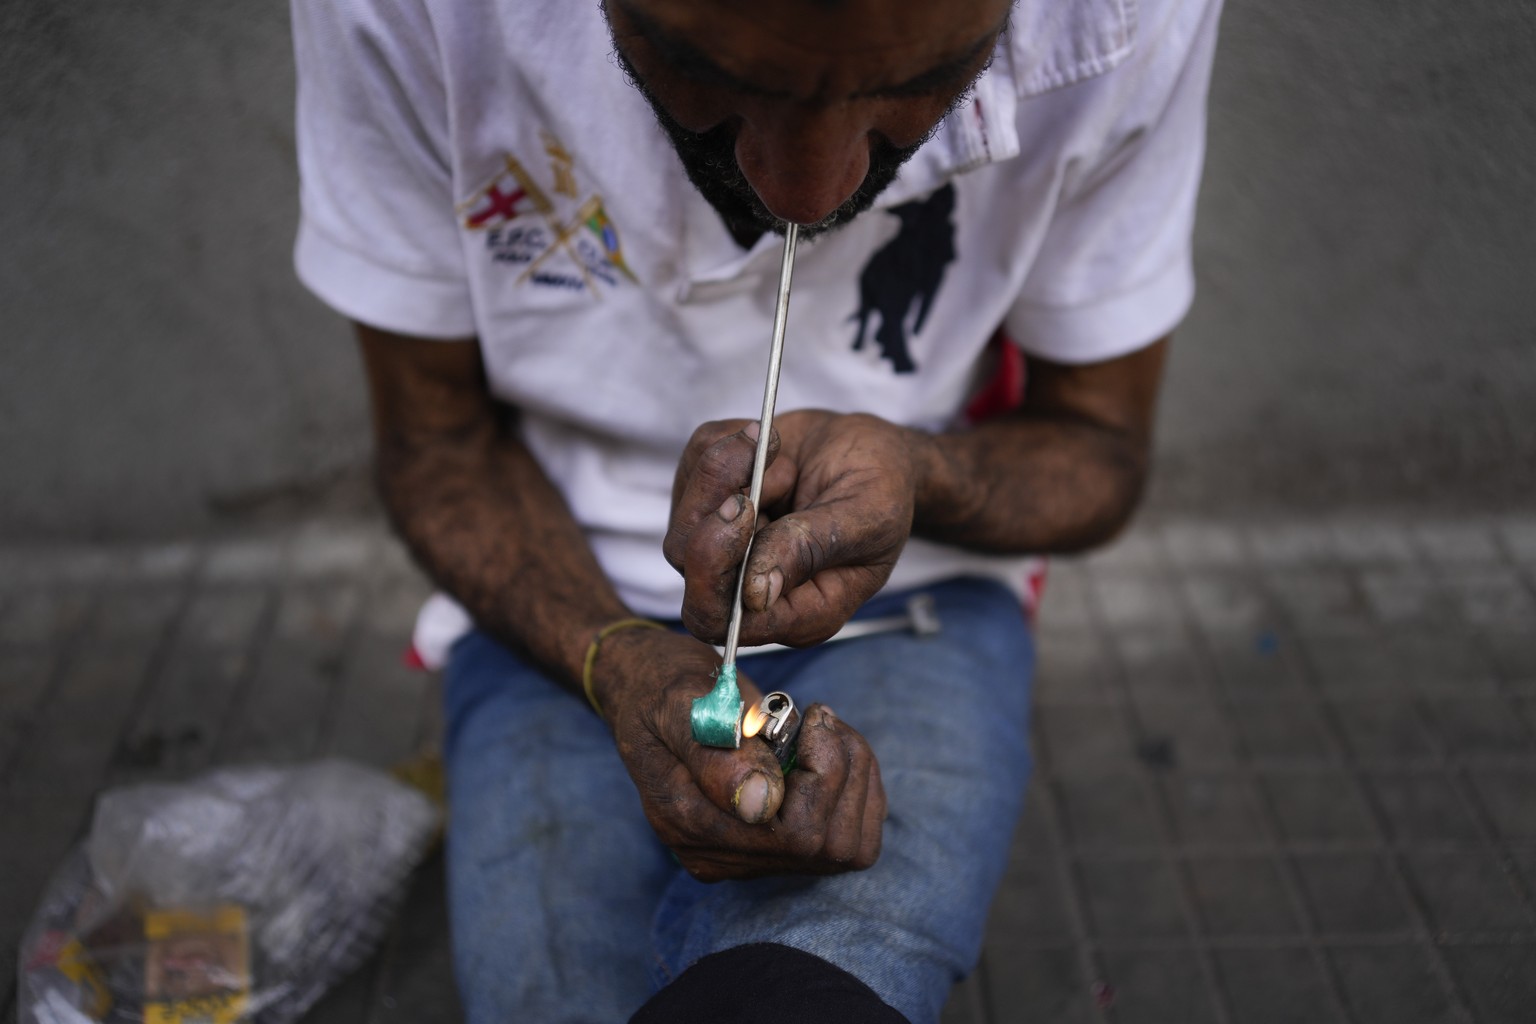 A man smokes crack in &quot;Cracolandia&quot; or Crackland, in downtown Sao Paulo, Brazil, Thursday, Oct. 27, 2022. &quot;Cracolandia&quot; is a popular denomination for this area which is notorious f ...